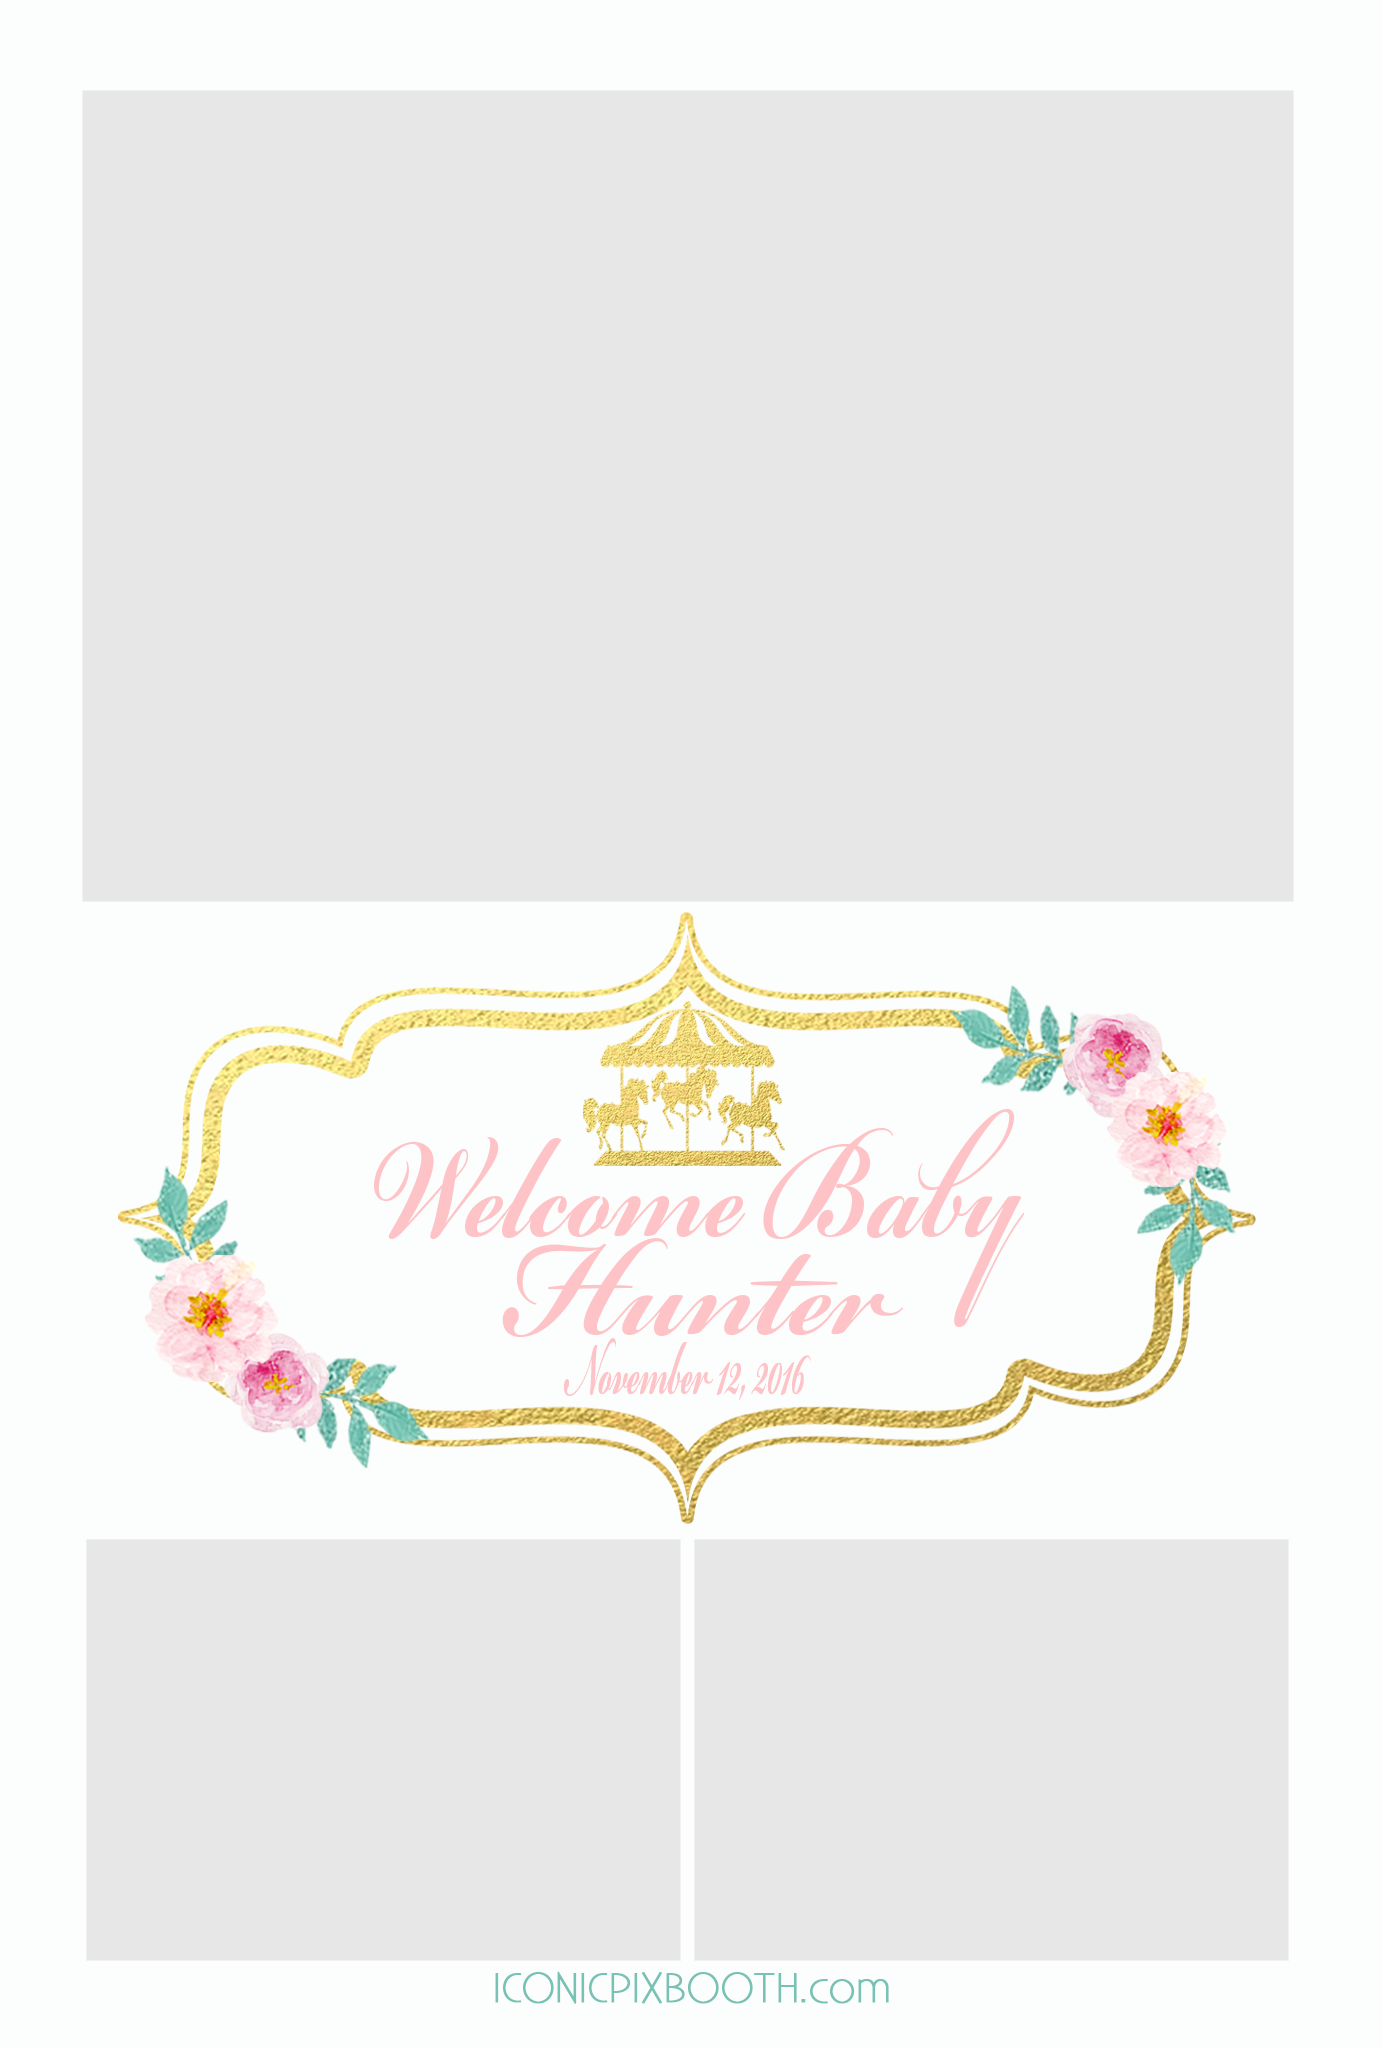 Carousel Baby Shower DD.png